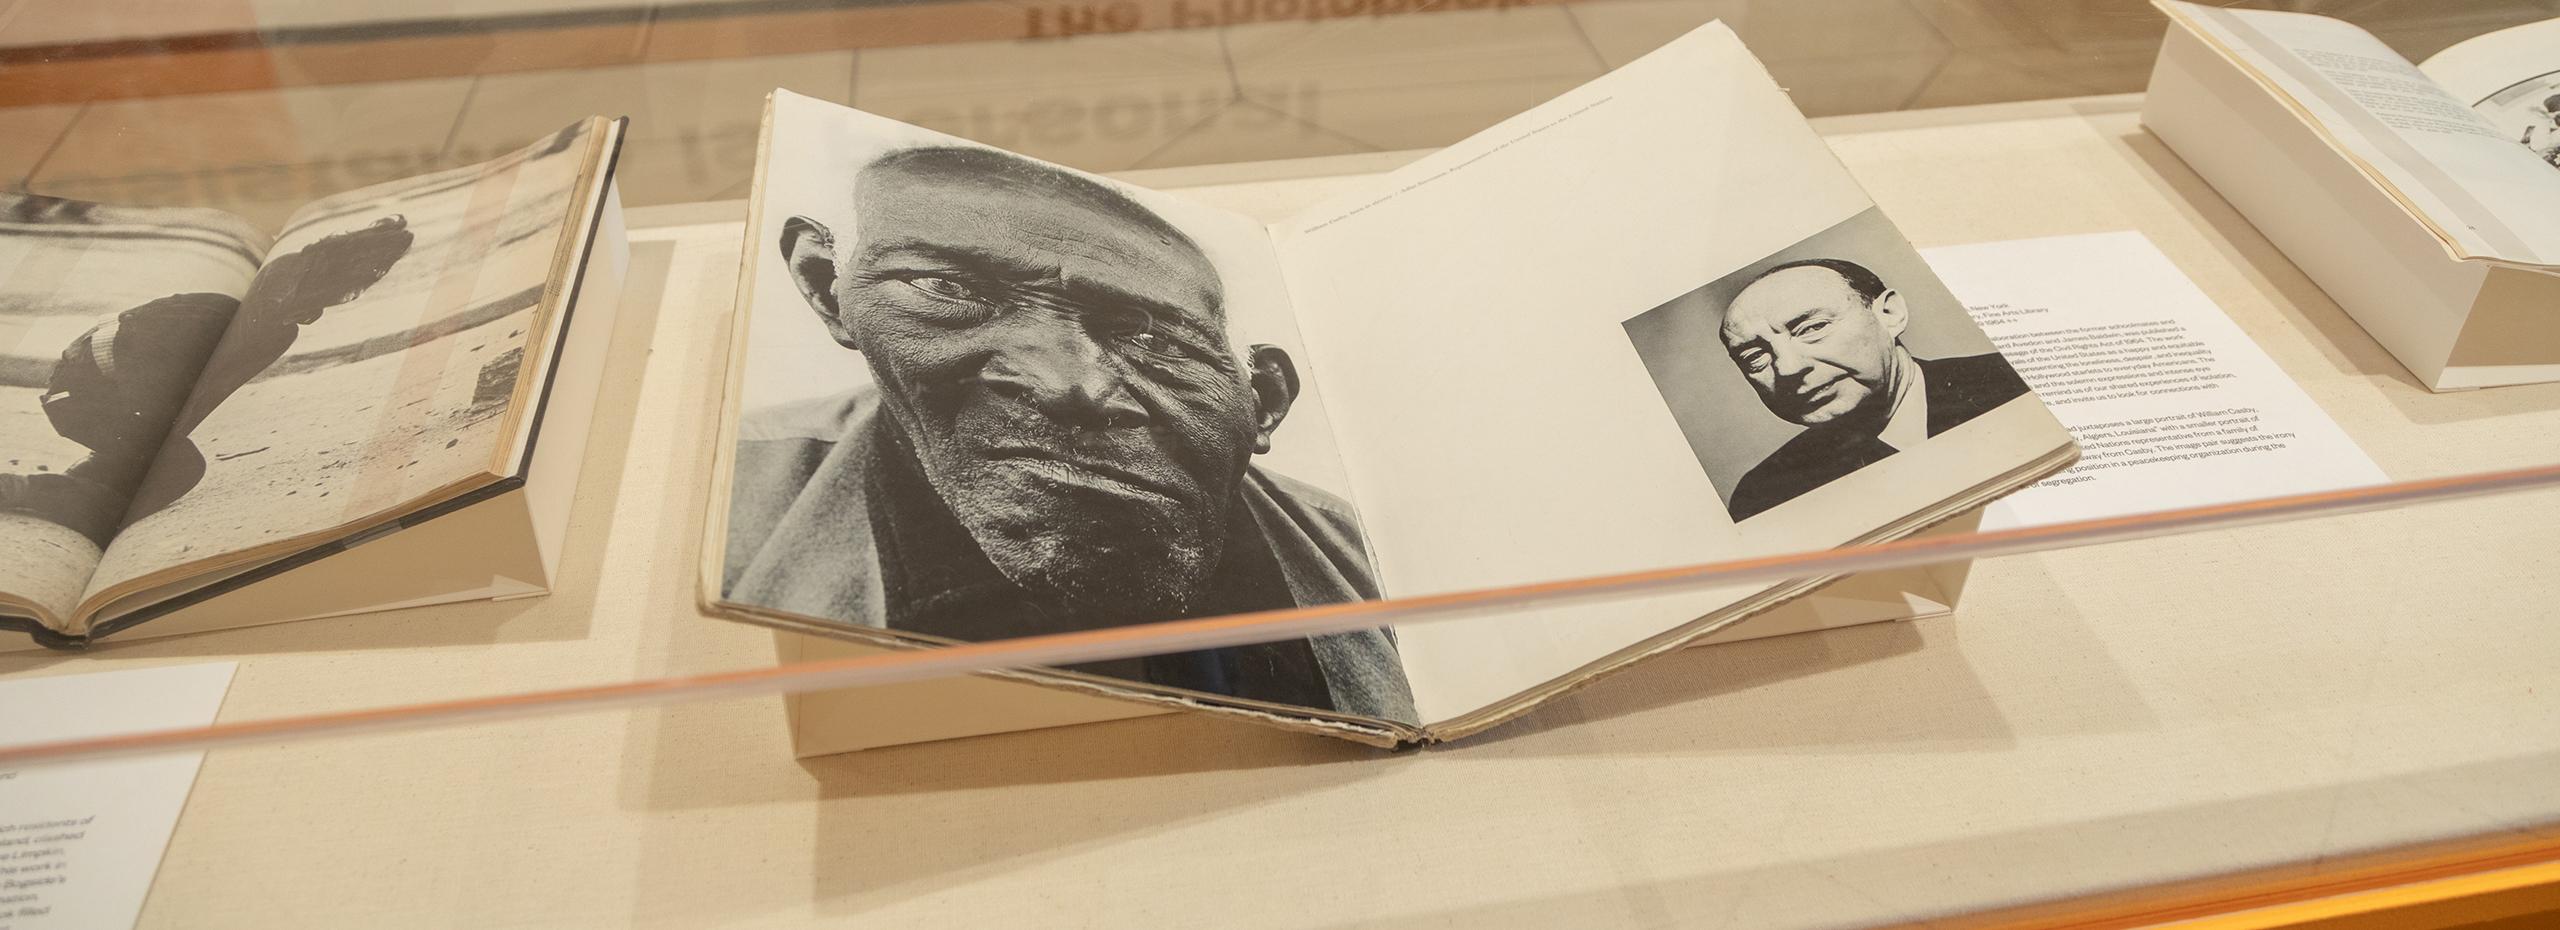 Open books of black and white photography are displayed in a case